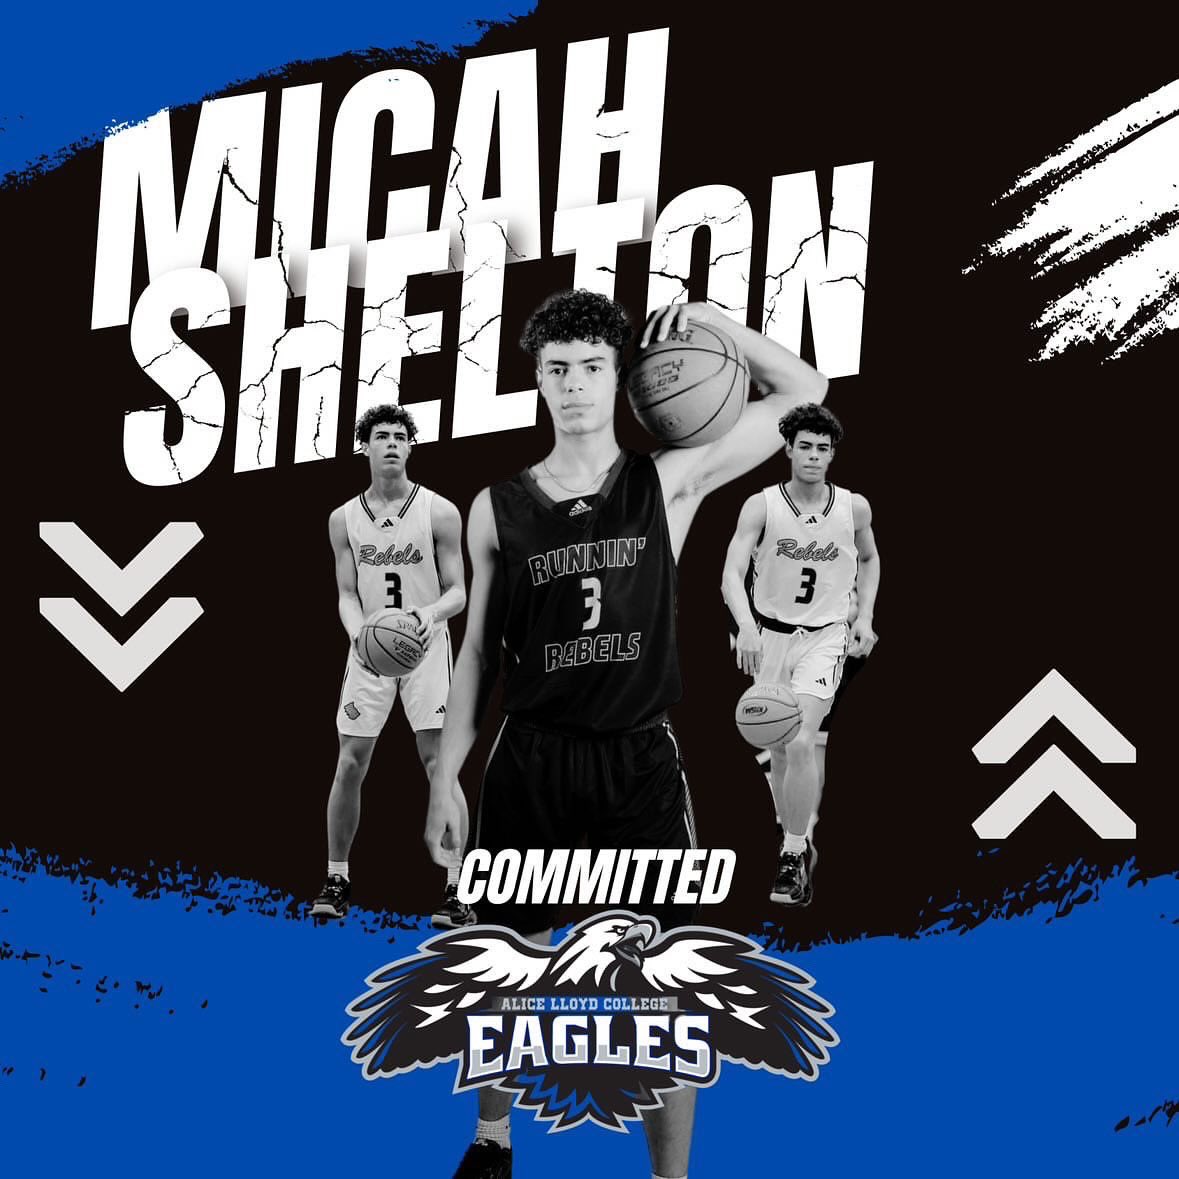 Beyond excited to announce that I am committing to Alice Lloyd college to continue my basketball and academic career. Thank you to Coach @cornett_scott @mrbtackett for this opportunity‼️#committed @PrepHoopsKY @RunninRebs_OCBB